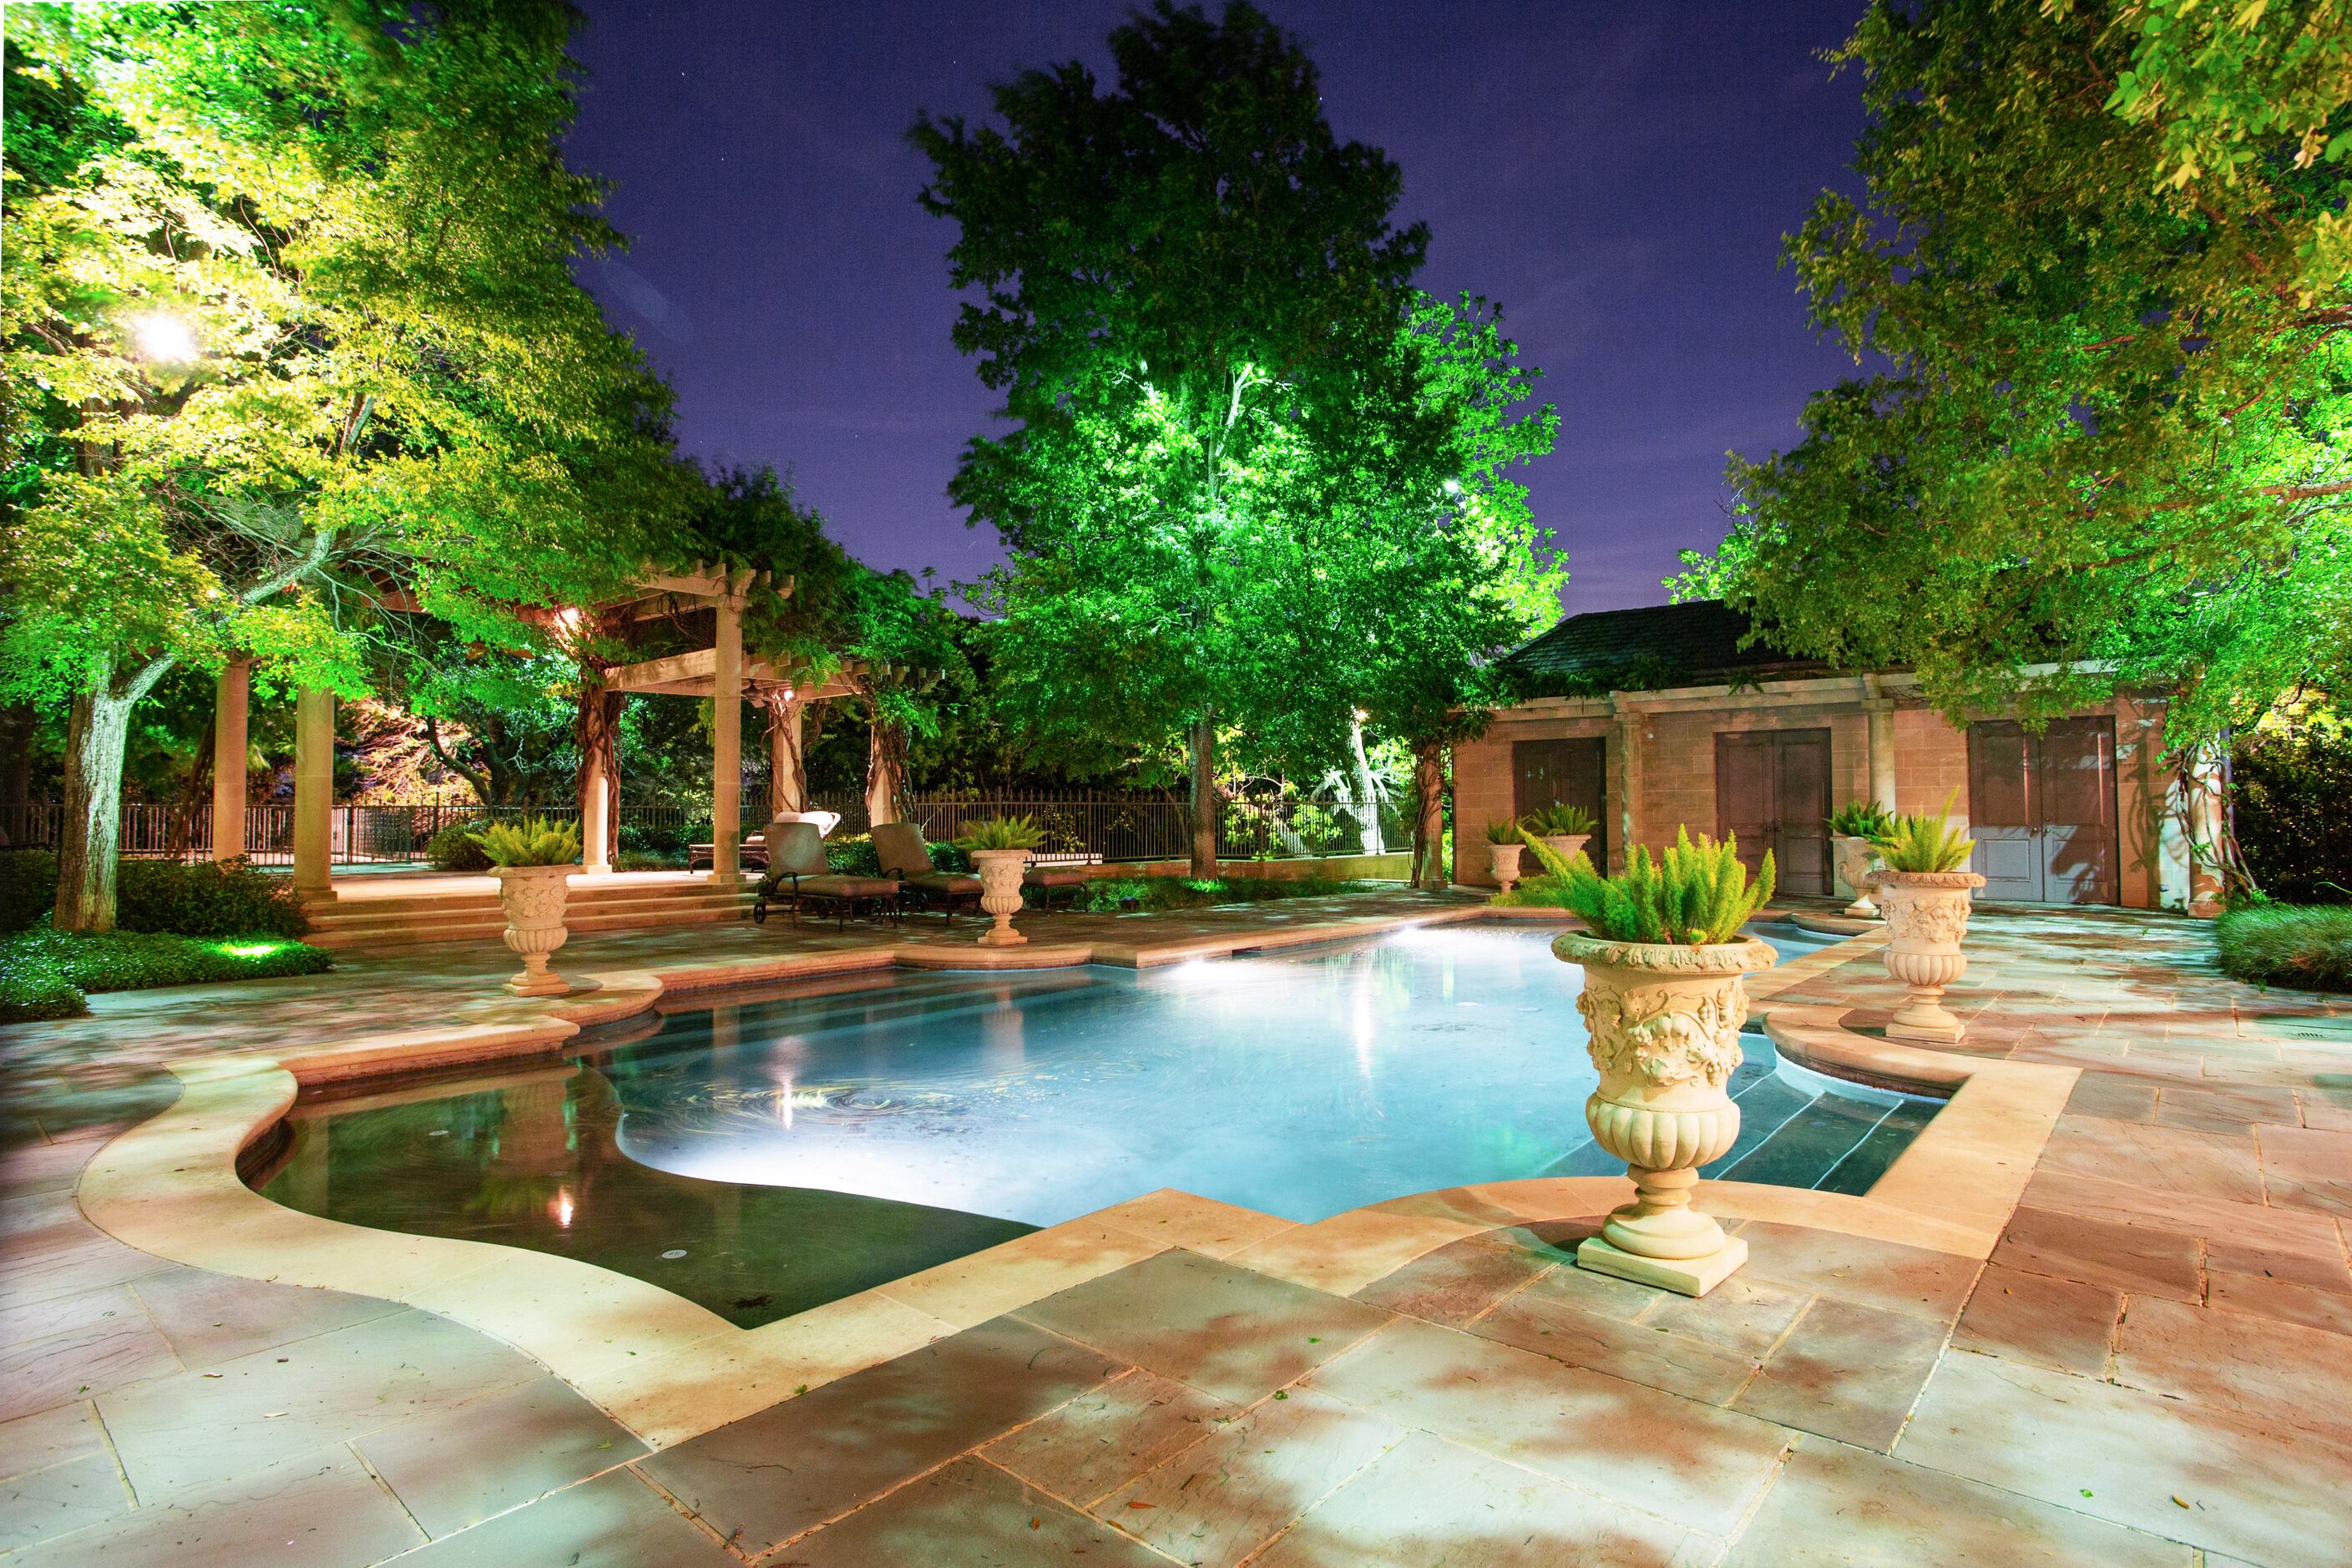 Former RadioShack CEO Len Roberts is auctioning off his 12,000-square-foot Fort Worth estate...